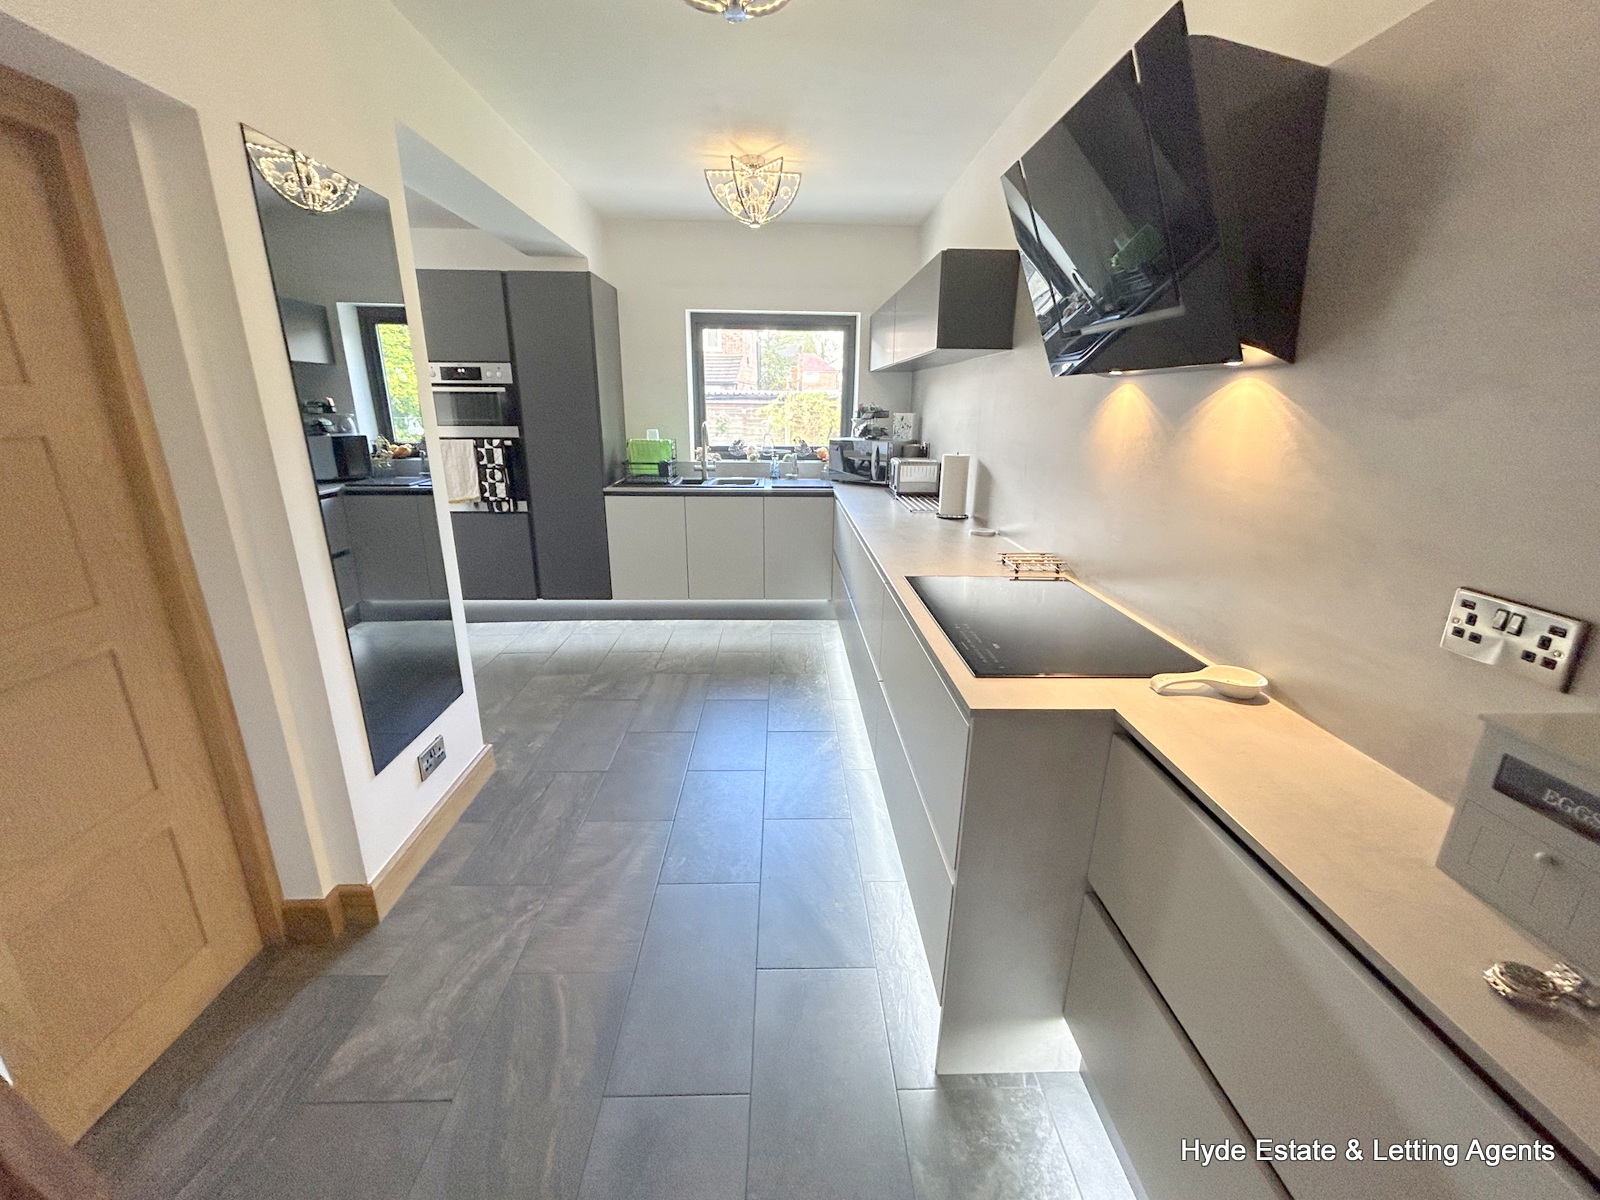 Images for Balmoral Avenue, Whitefield, Manchester, M45 6BB